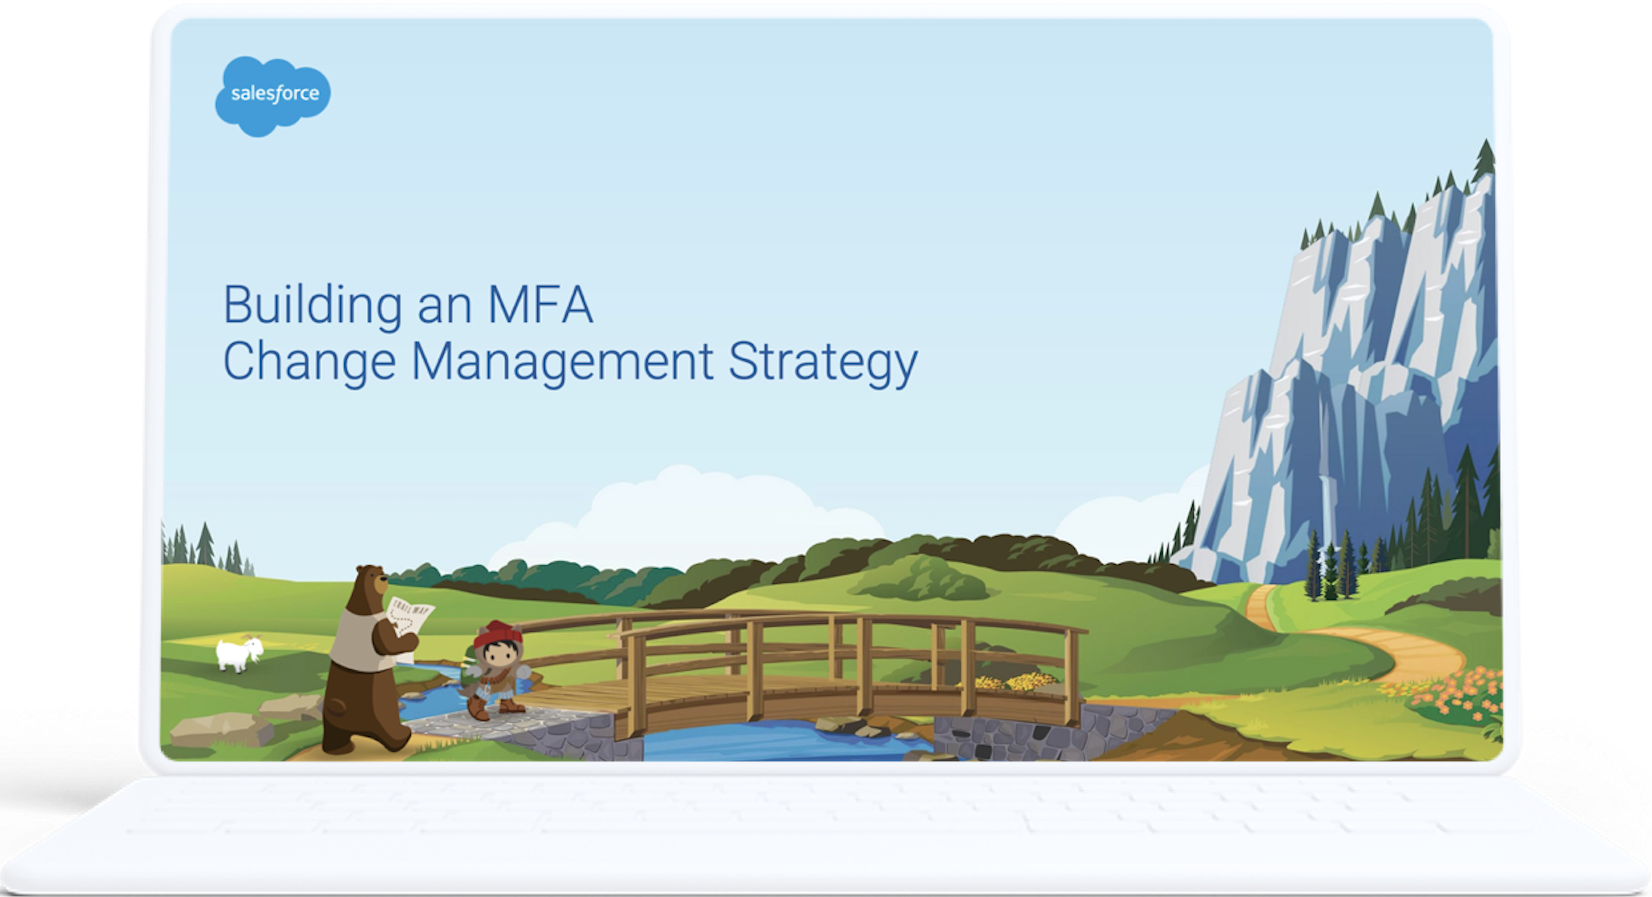 Laptop screen displaying "Building MFA Change Management Strategy"